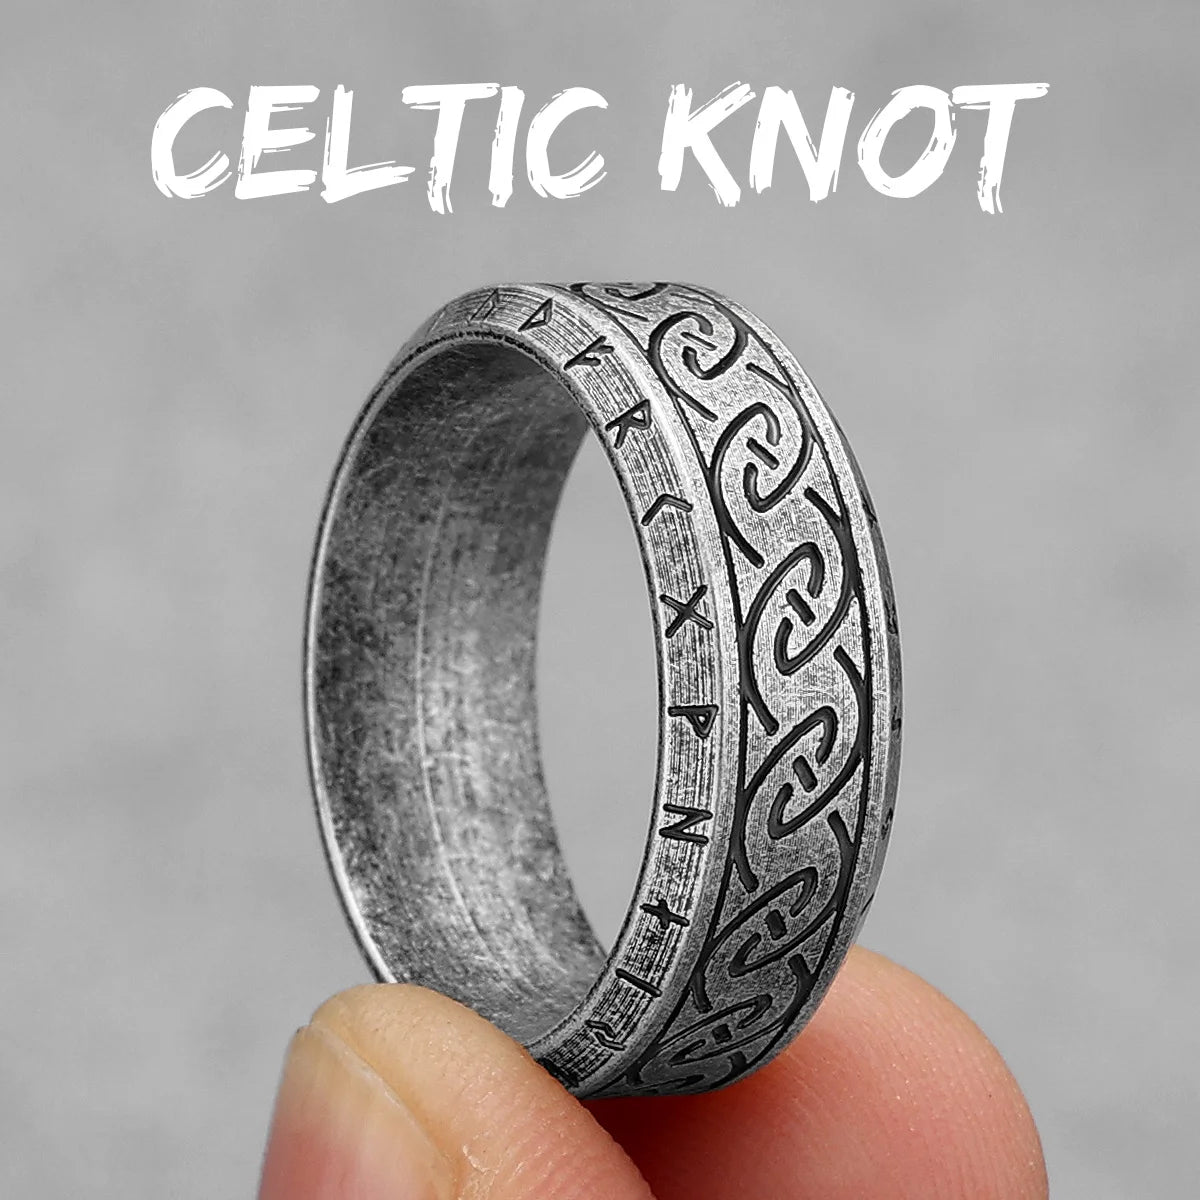 Vintage Edition - Viking Runes Celtic Knot Rings - Mythical Pieces 11 / R1015-Vintage Silver